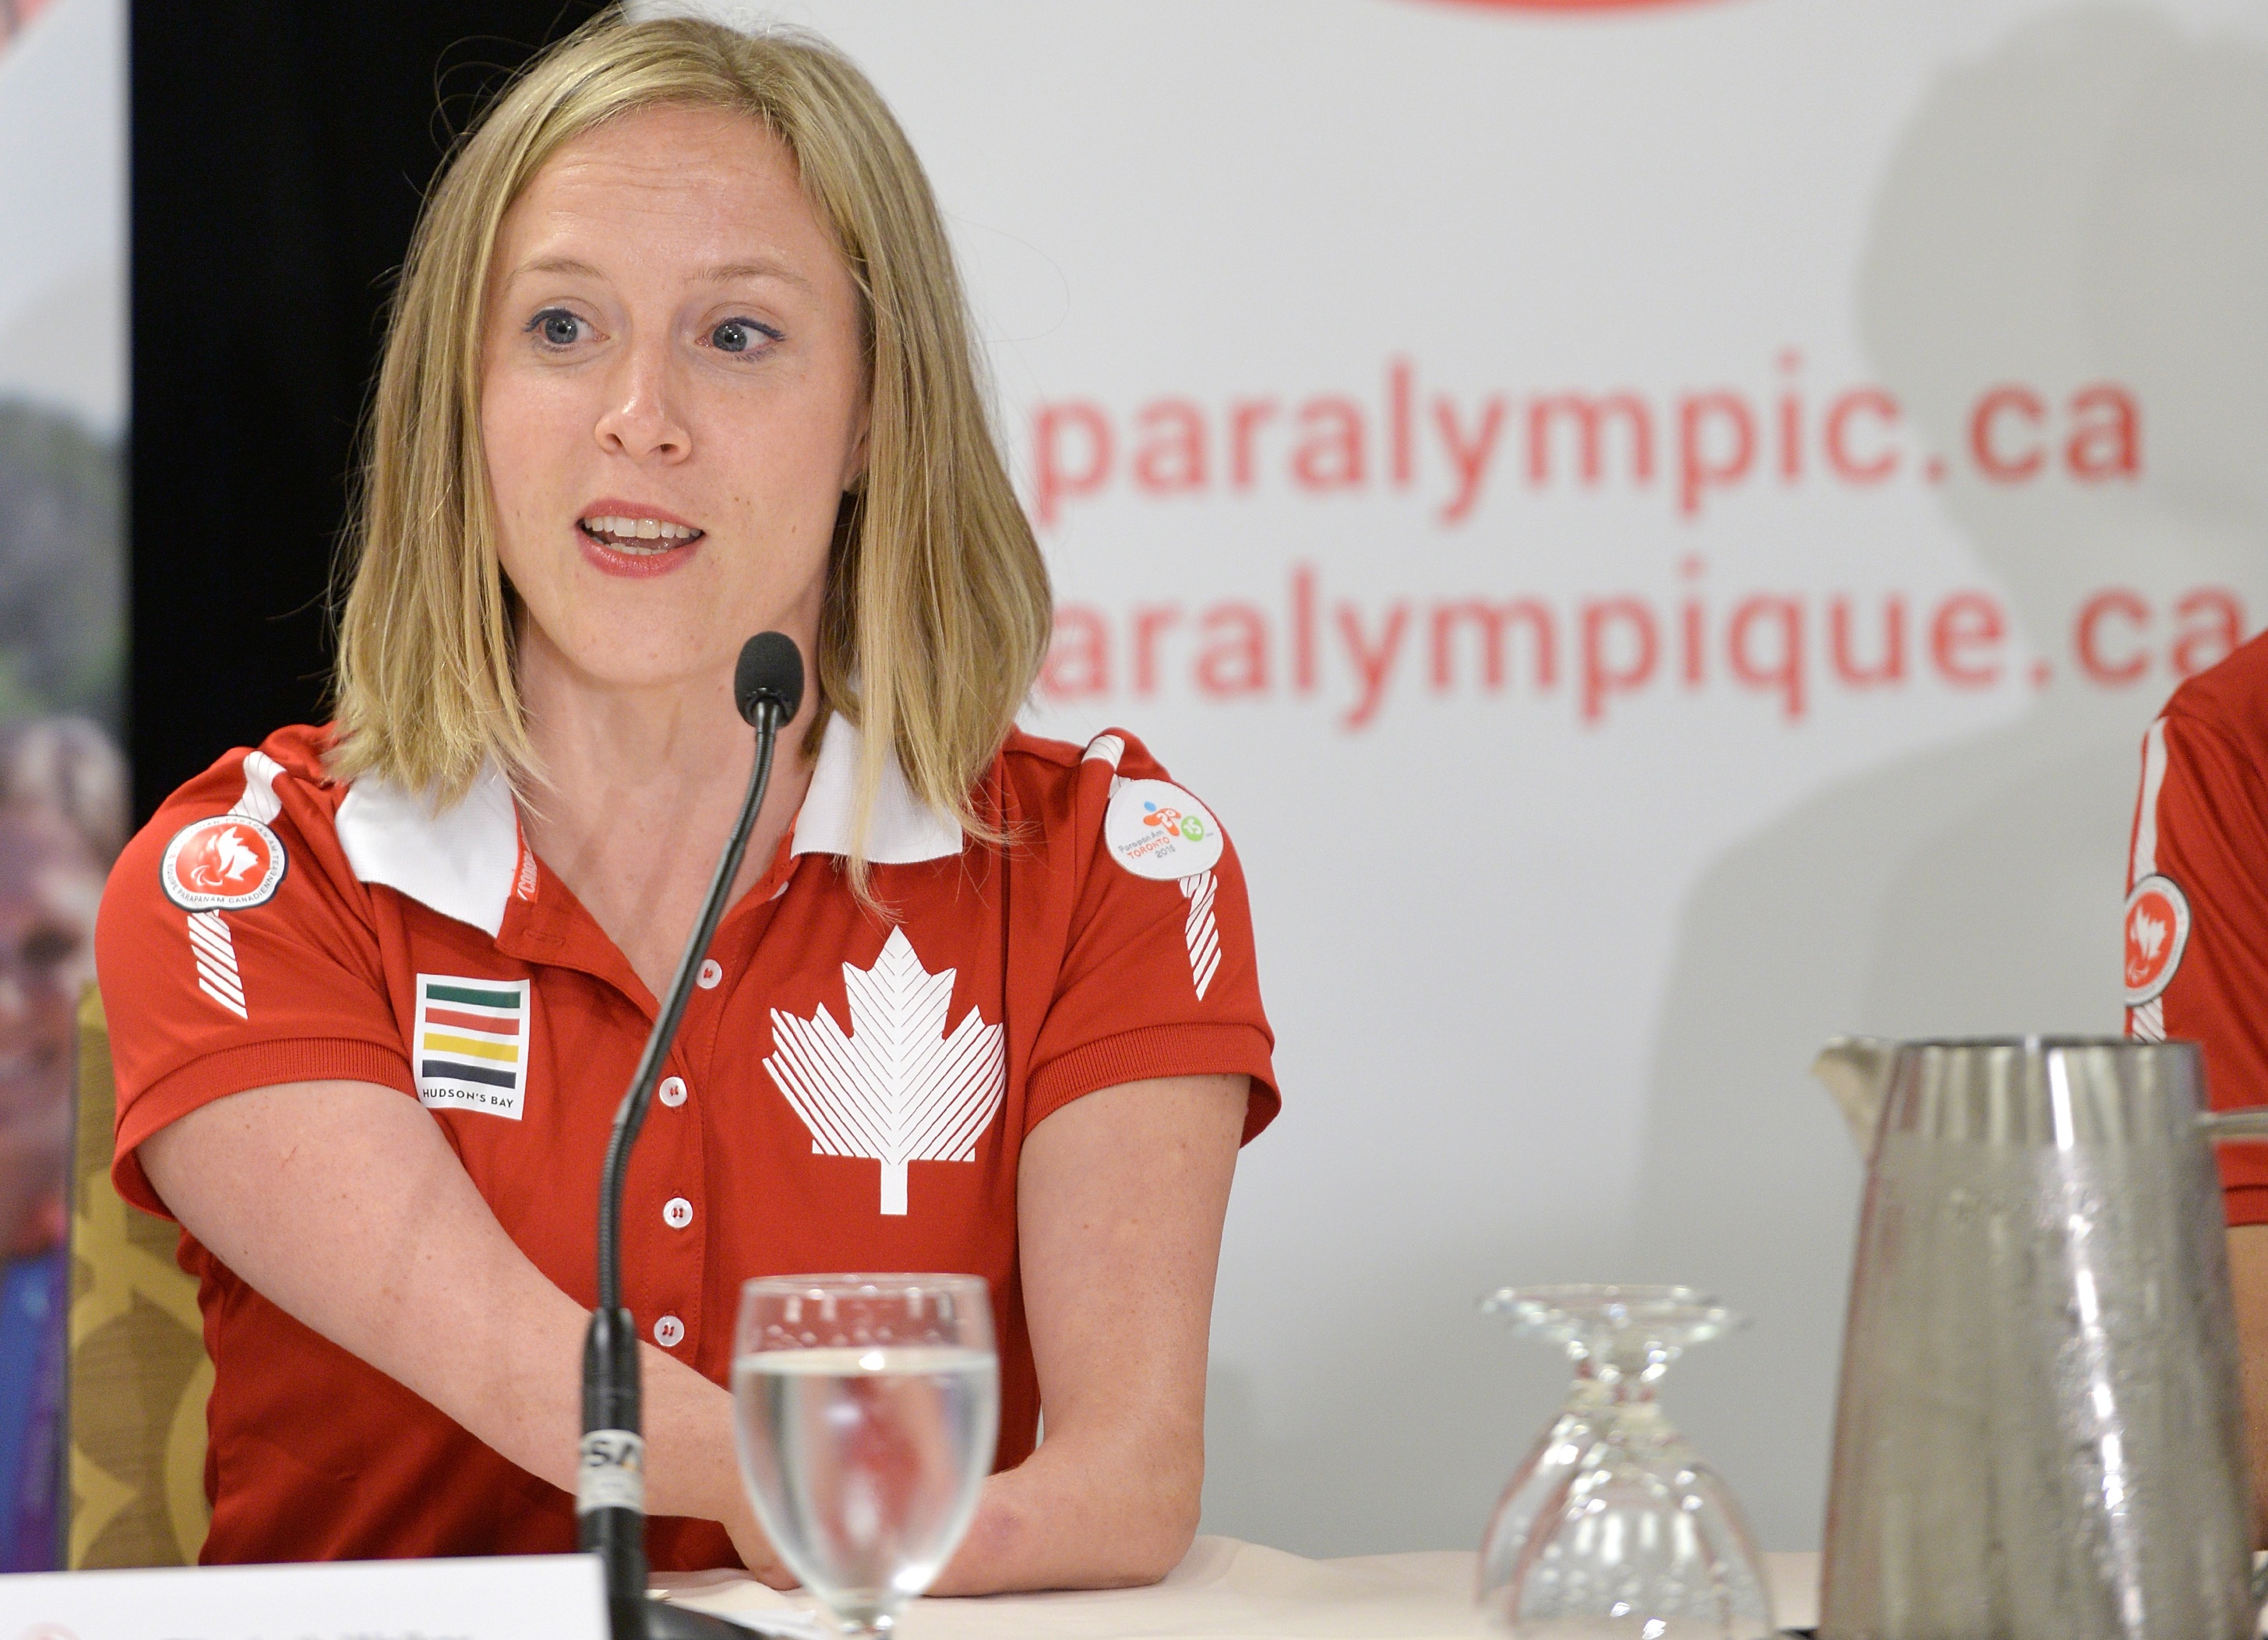 Chef de mission Elisabeth Walker-Young speaking in front of a microphone at a press conference for the Toronto 2015 Parapan Am Games